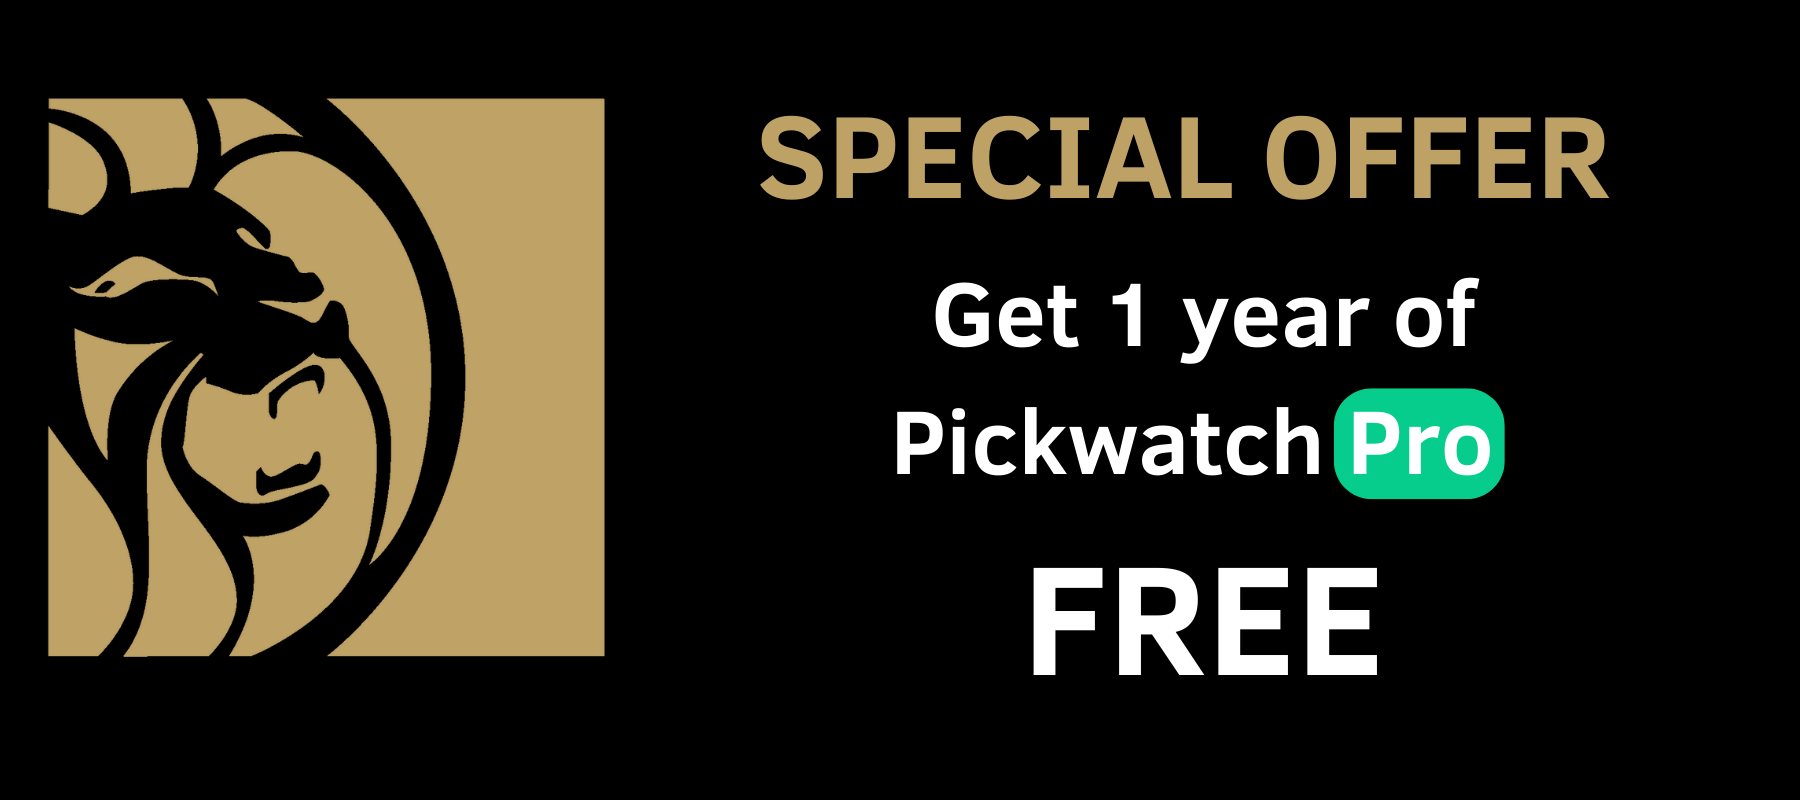 NFL Pickwatch - Offer ending 20th Jan: Get a year of Pickwatch Pro FREE  with BetMGM